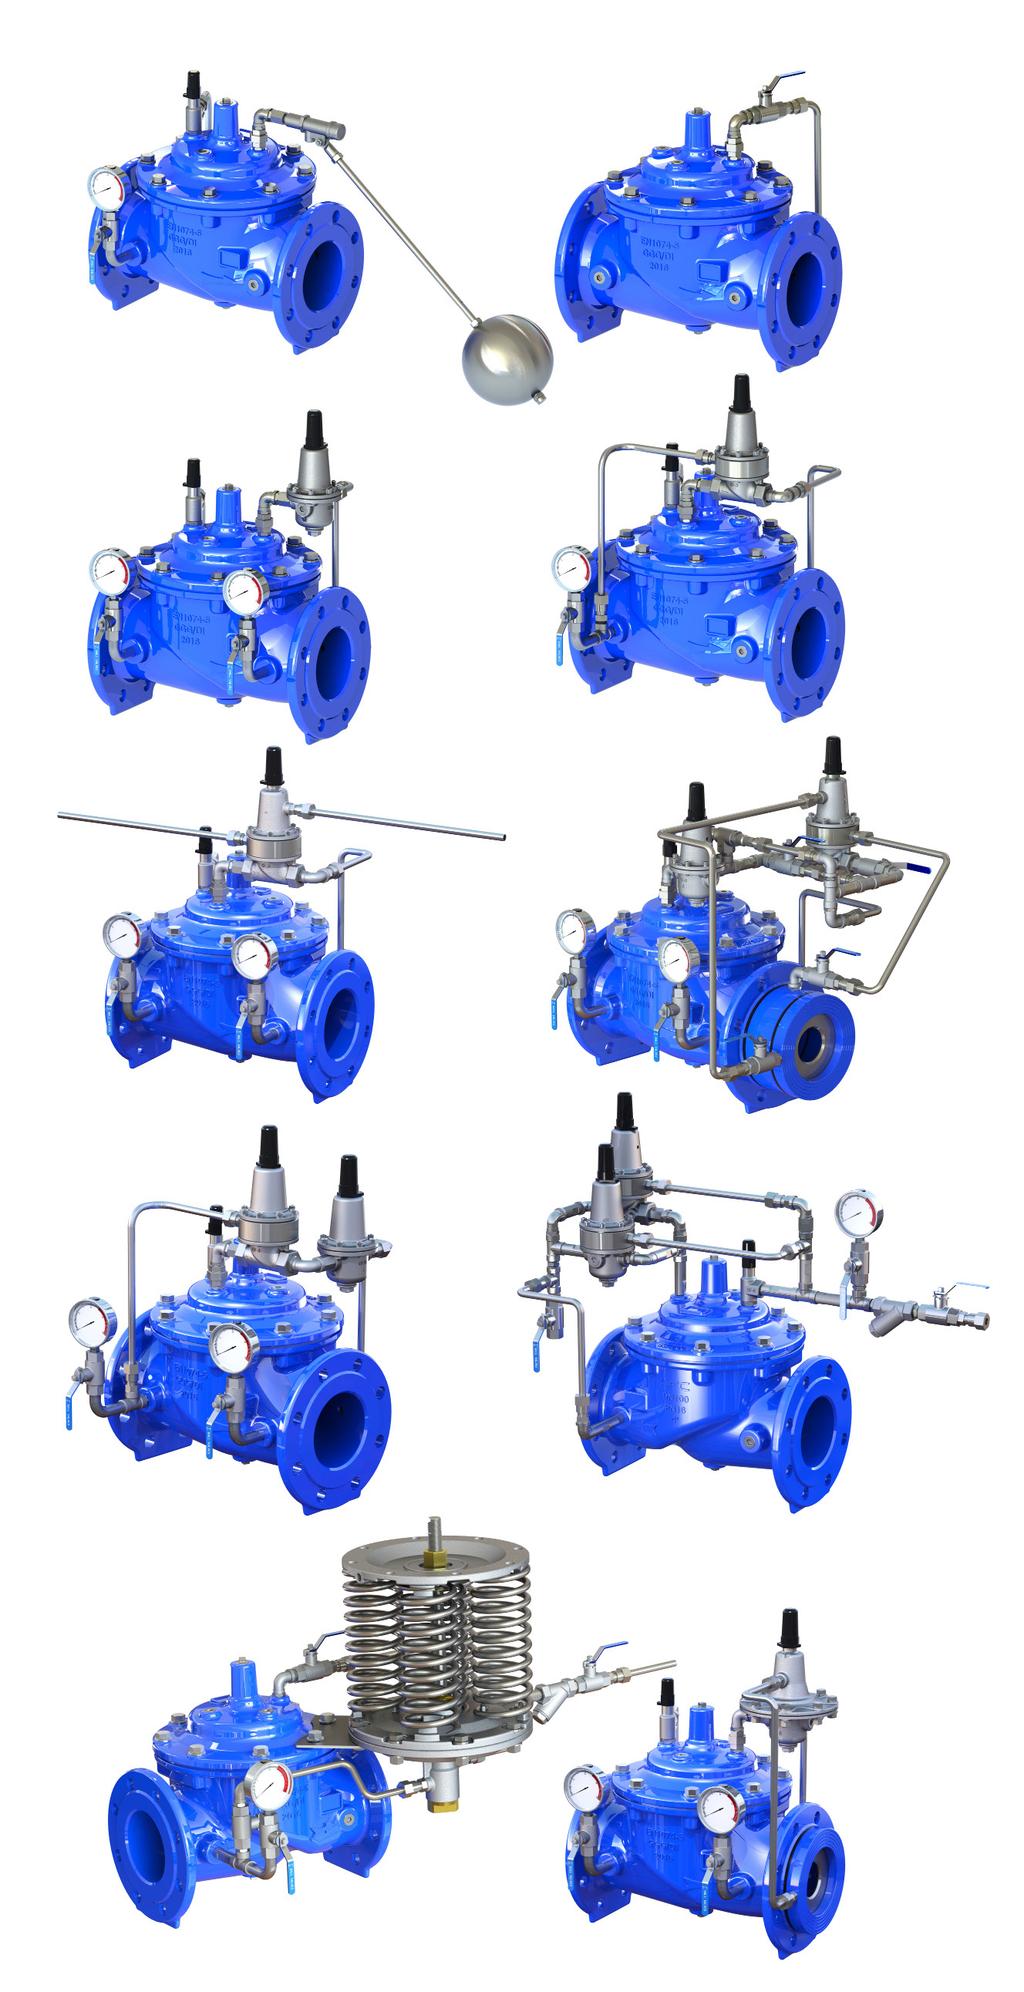 A00 Automatic Control Valve T he -A00 series of automatic control valves are Basic Valves to provide hydraulically driven solutions to pressure, flow and level control applications.